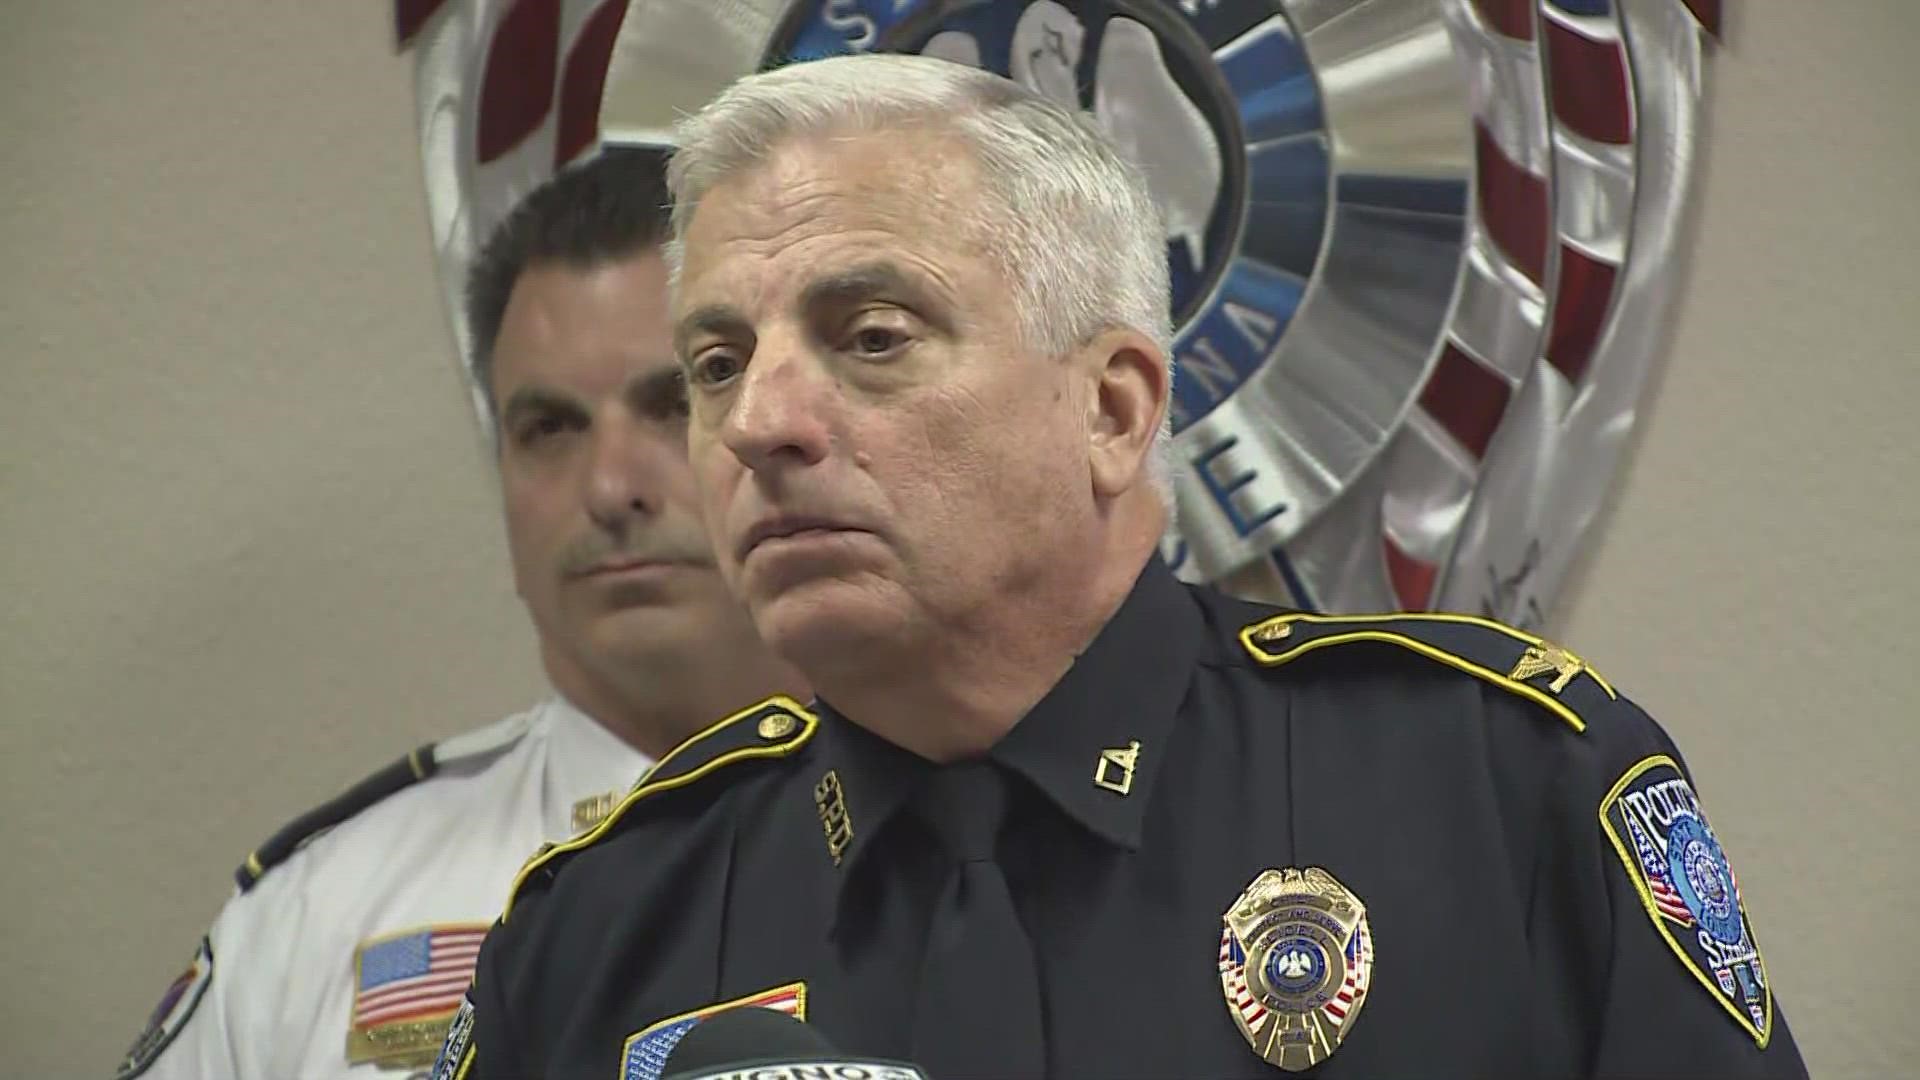 "This appears to be a tragic accident," according to Slidell Police Chief Randy Fandal.